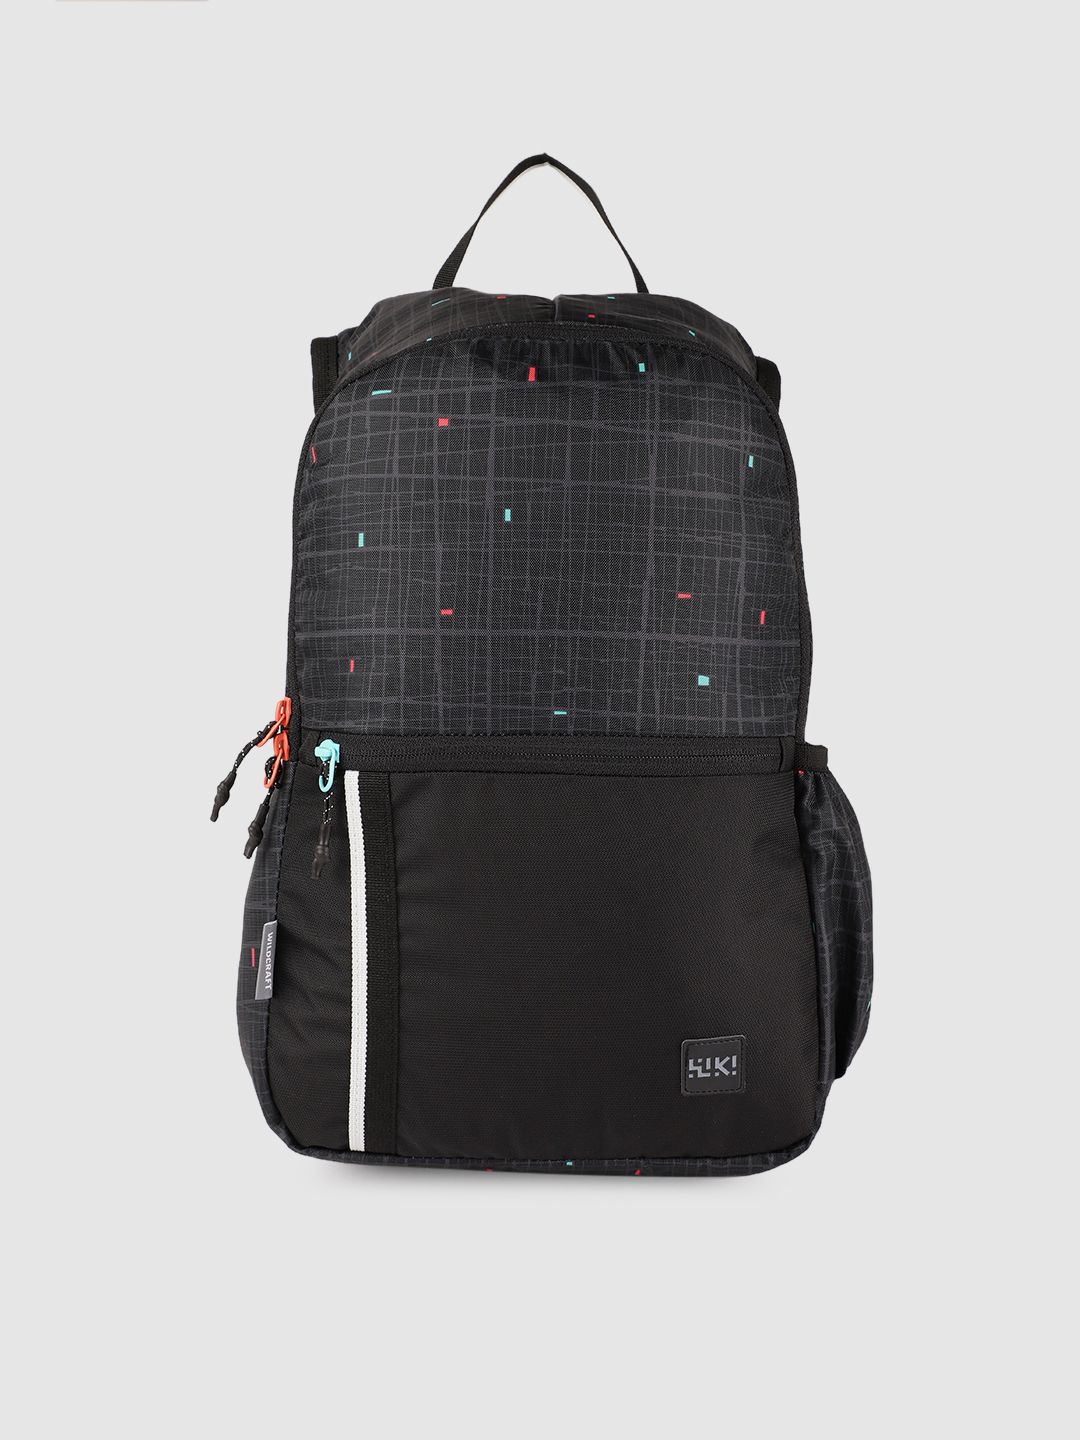 Wildcraft Women Black MyTrix 3 Graphic Backpack Price in India